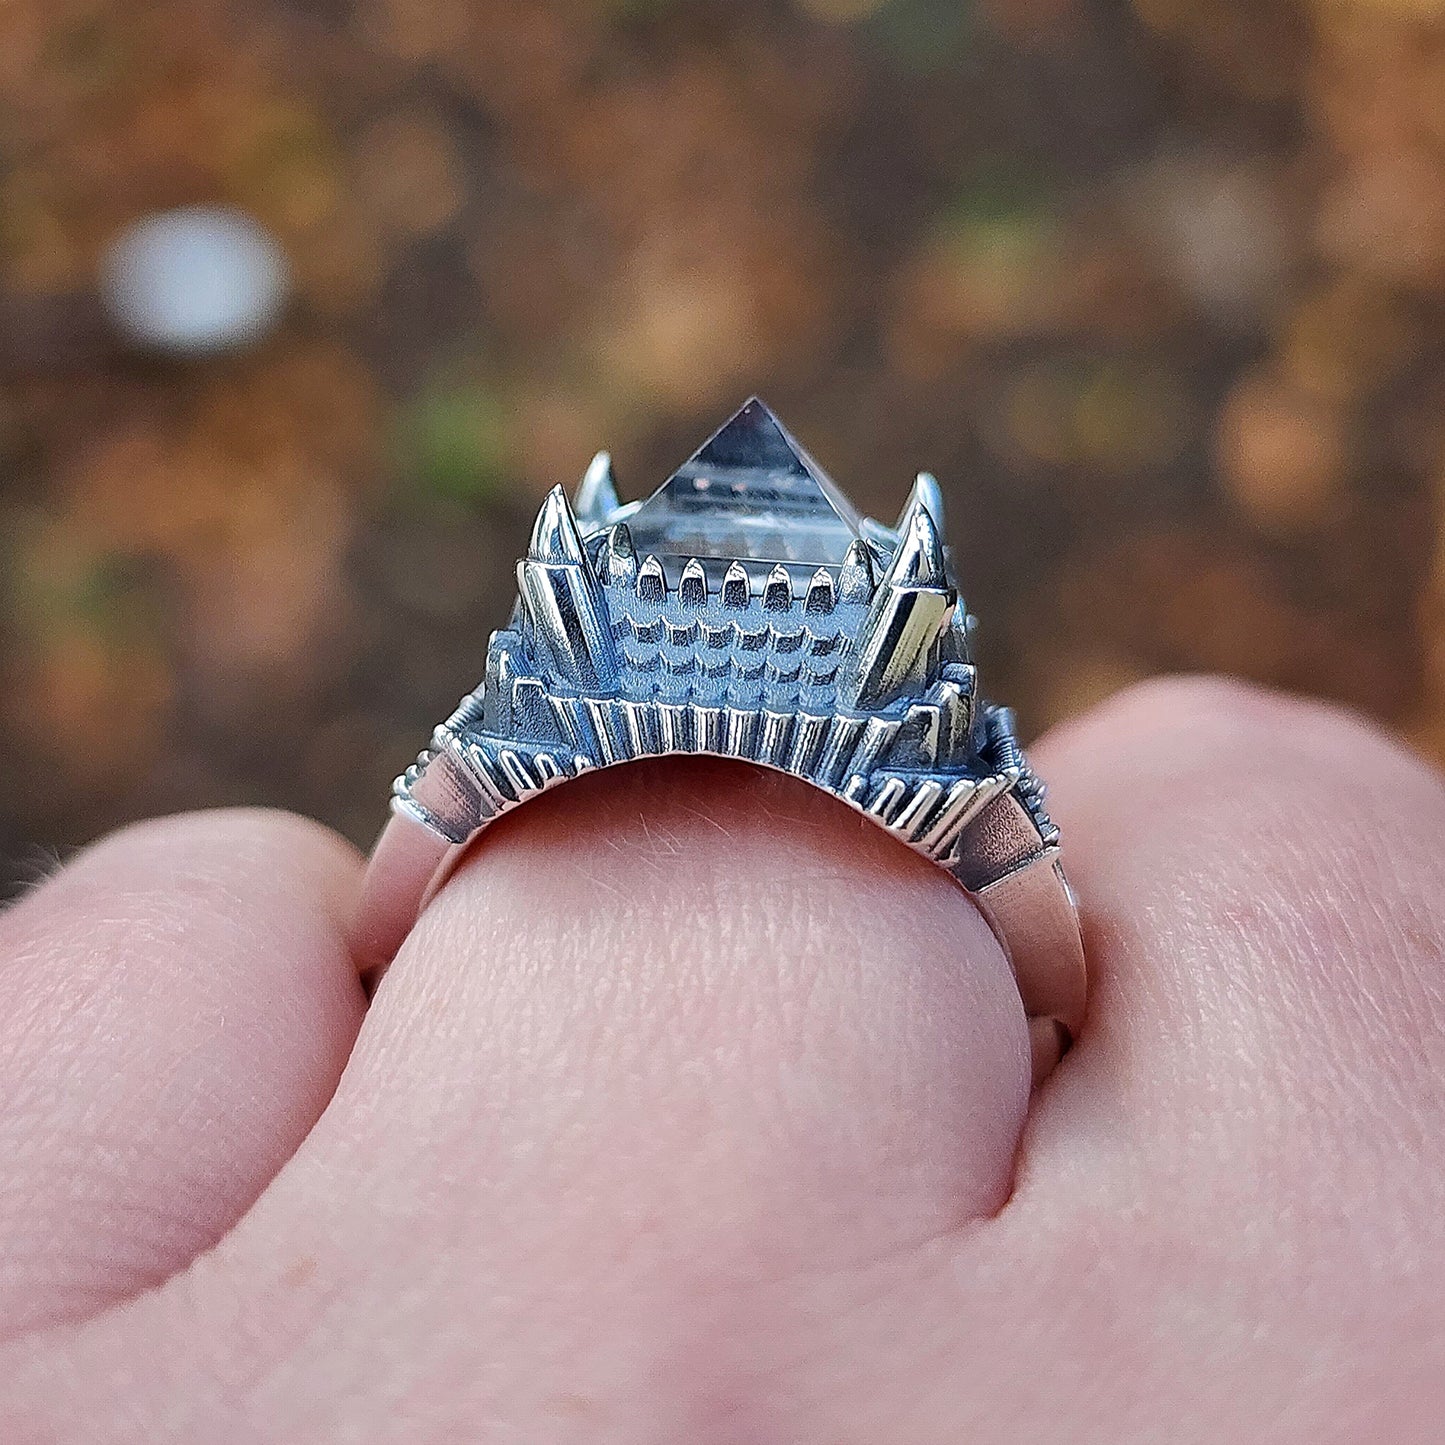 Haunted Tower Ring with Skull Pyramid Quartz Spooky Halloween Jewelry - Drawlloween Sterling Silver